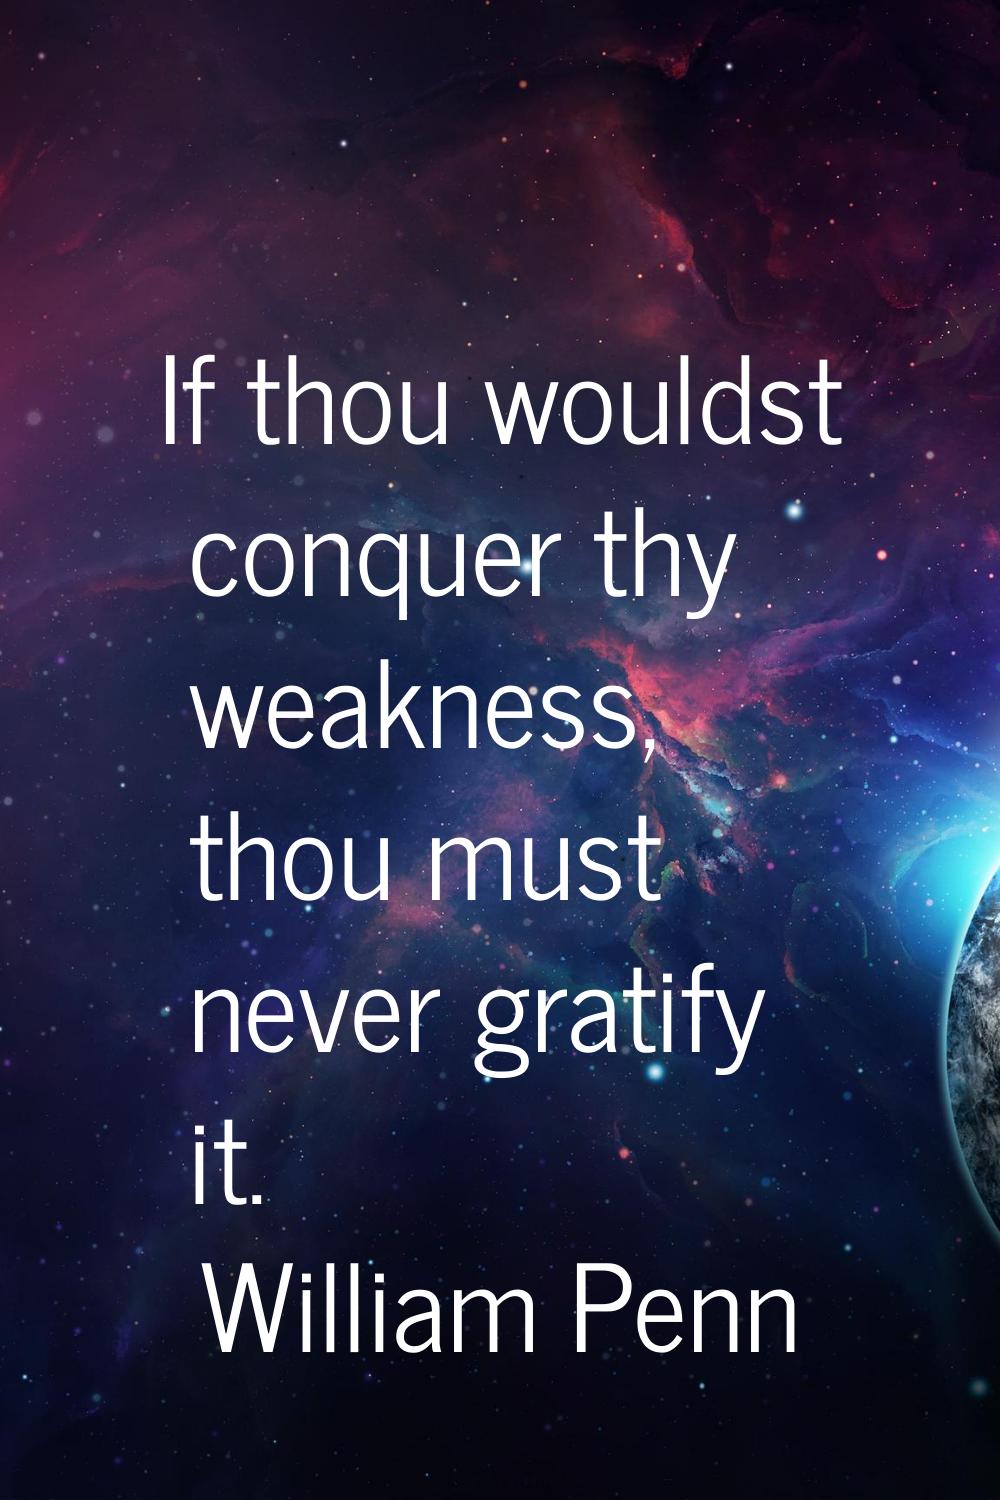 If thou wouldst conquer thy weakness, thou must never gratify it.